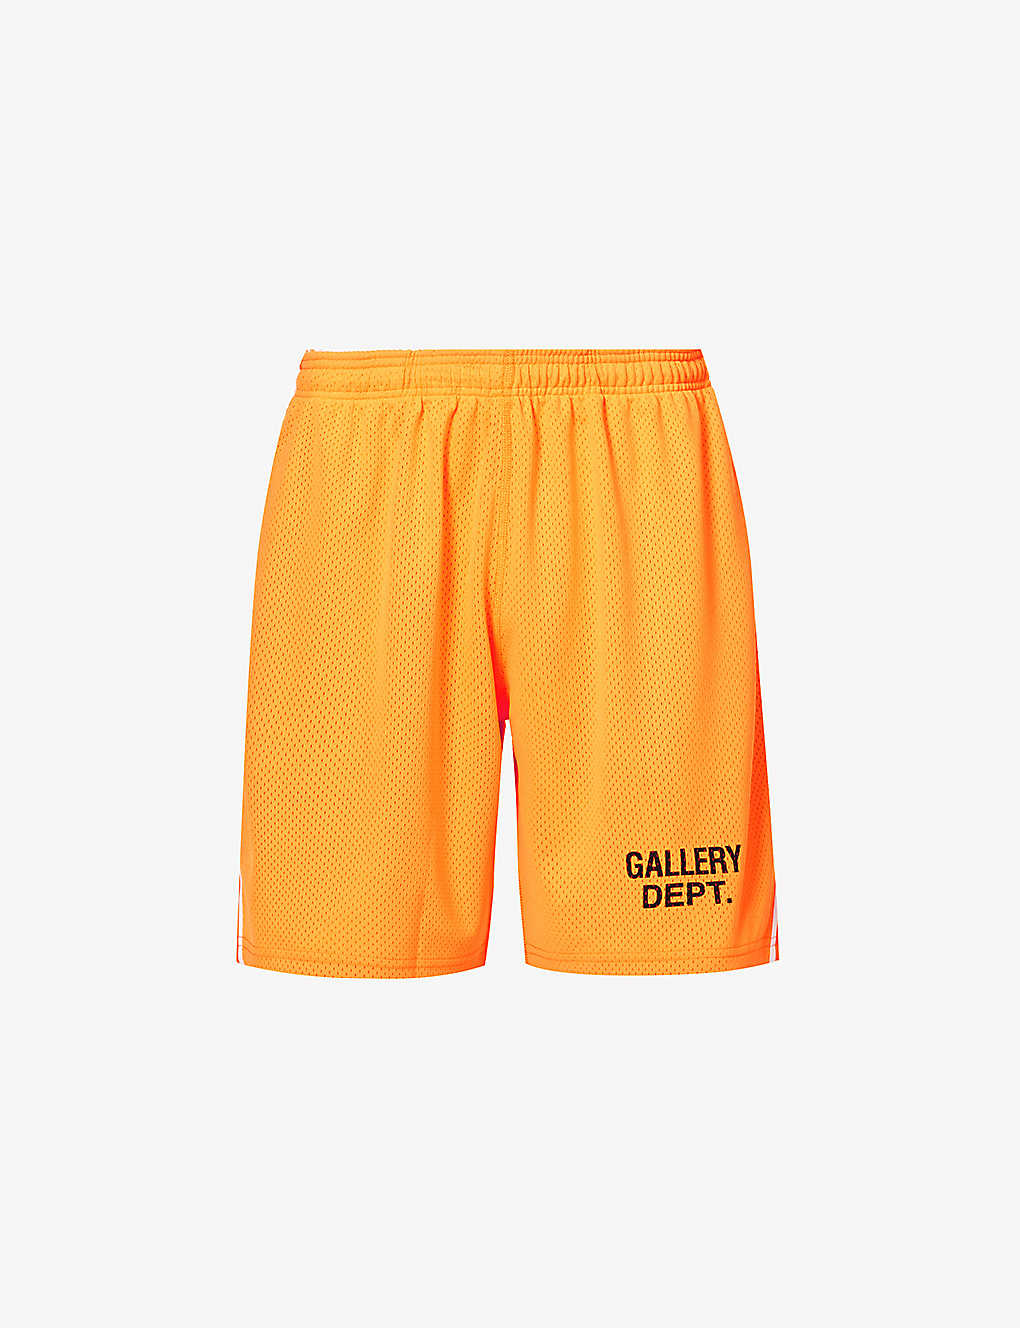 Gallery Dept. Sports Shorts In Gold Yellow